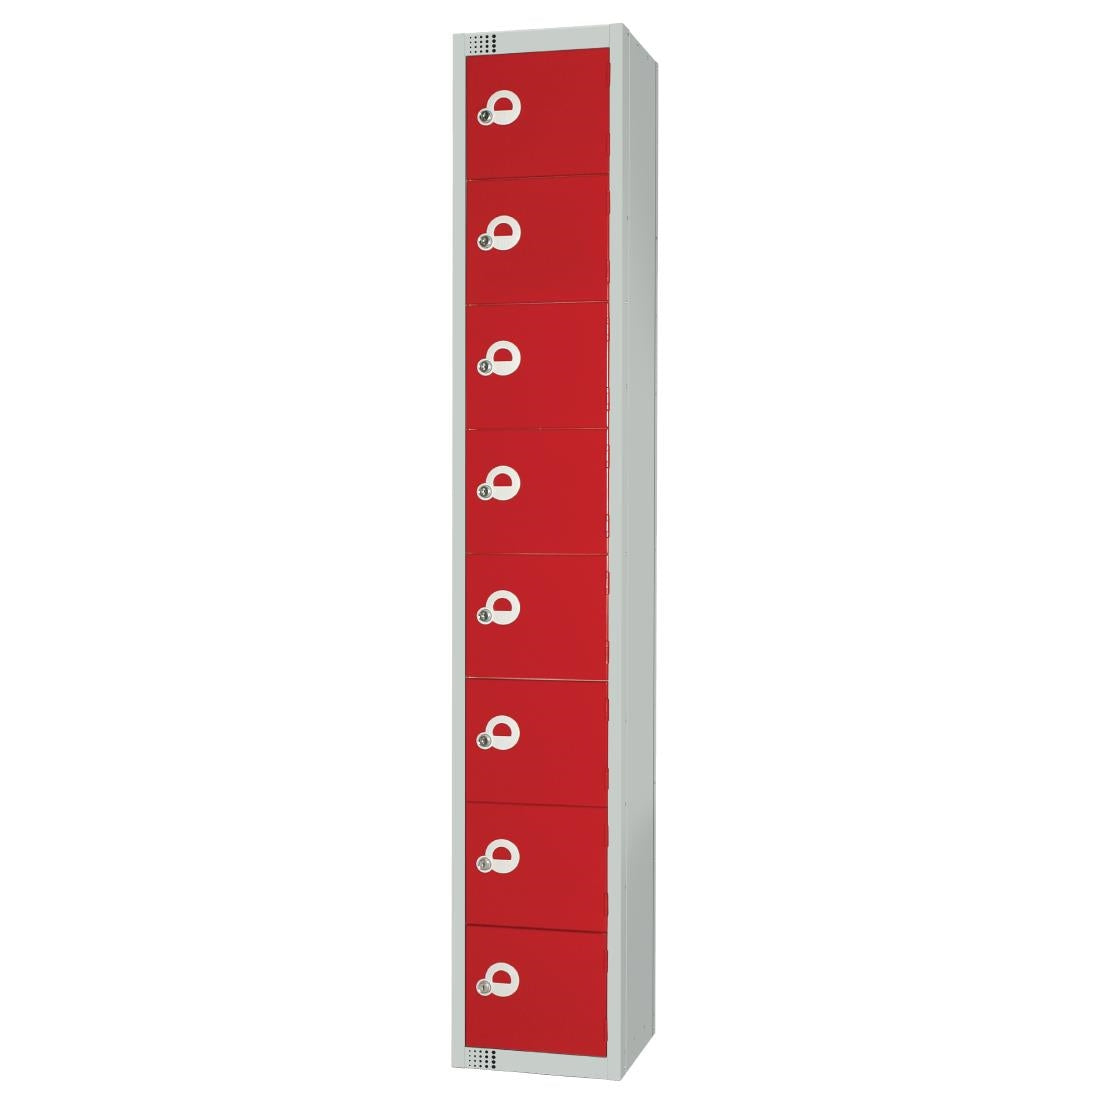 CE108-ELS Elite Eight Door Electronic Combination Locker with Sloping Top Red JD Catering Equipment Solutions Ltd